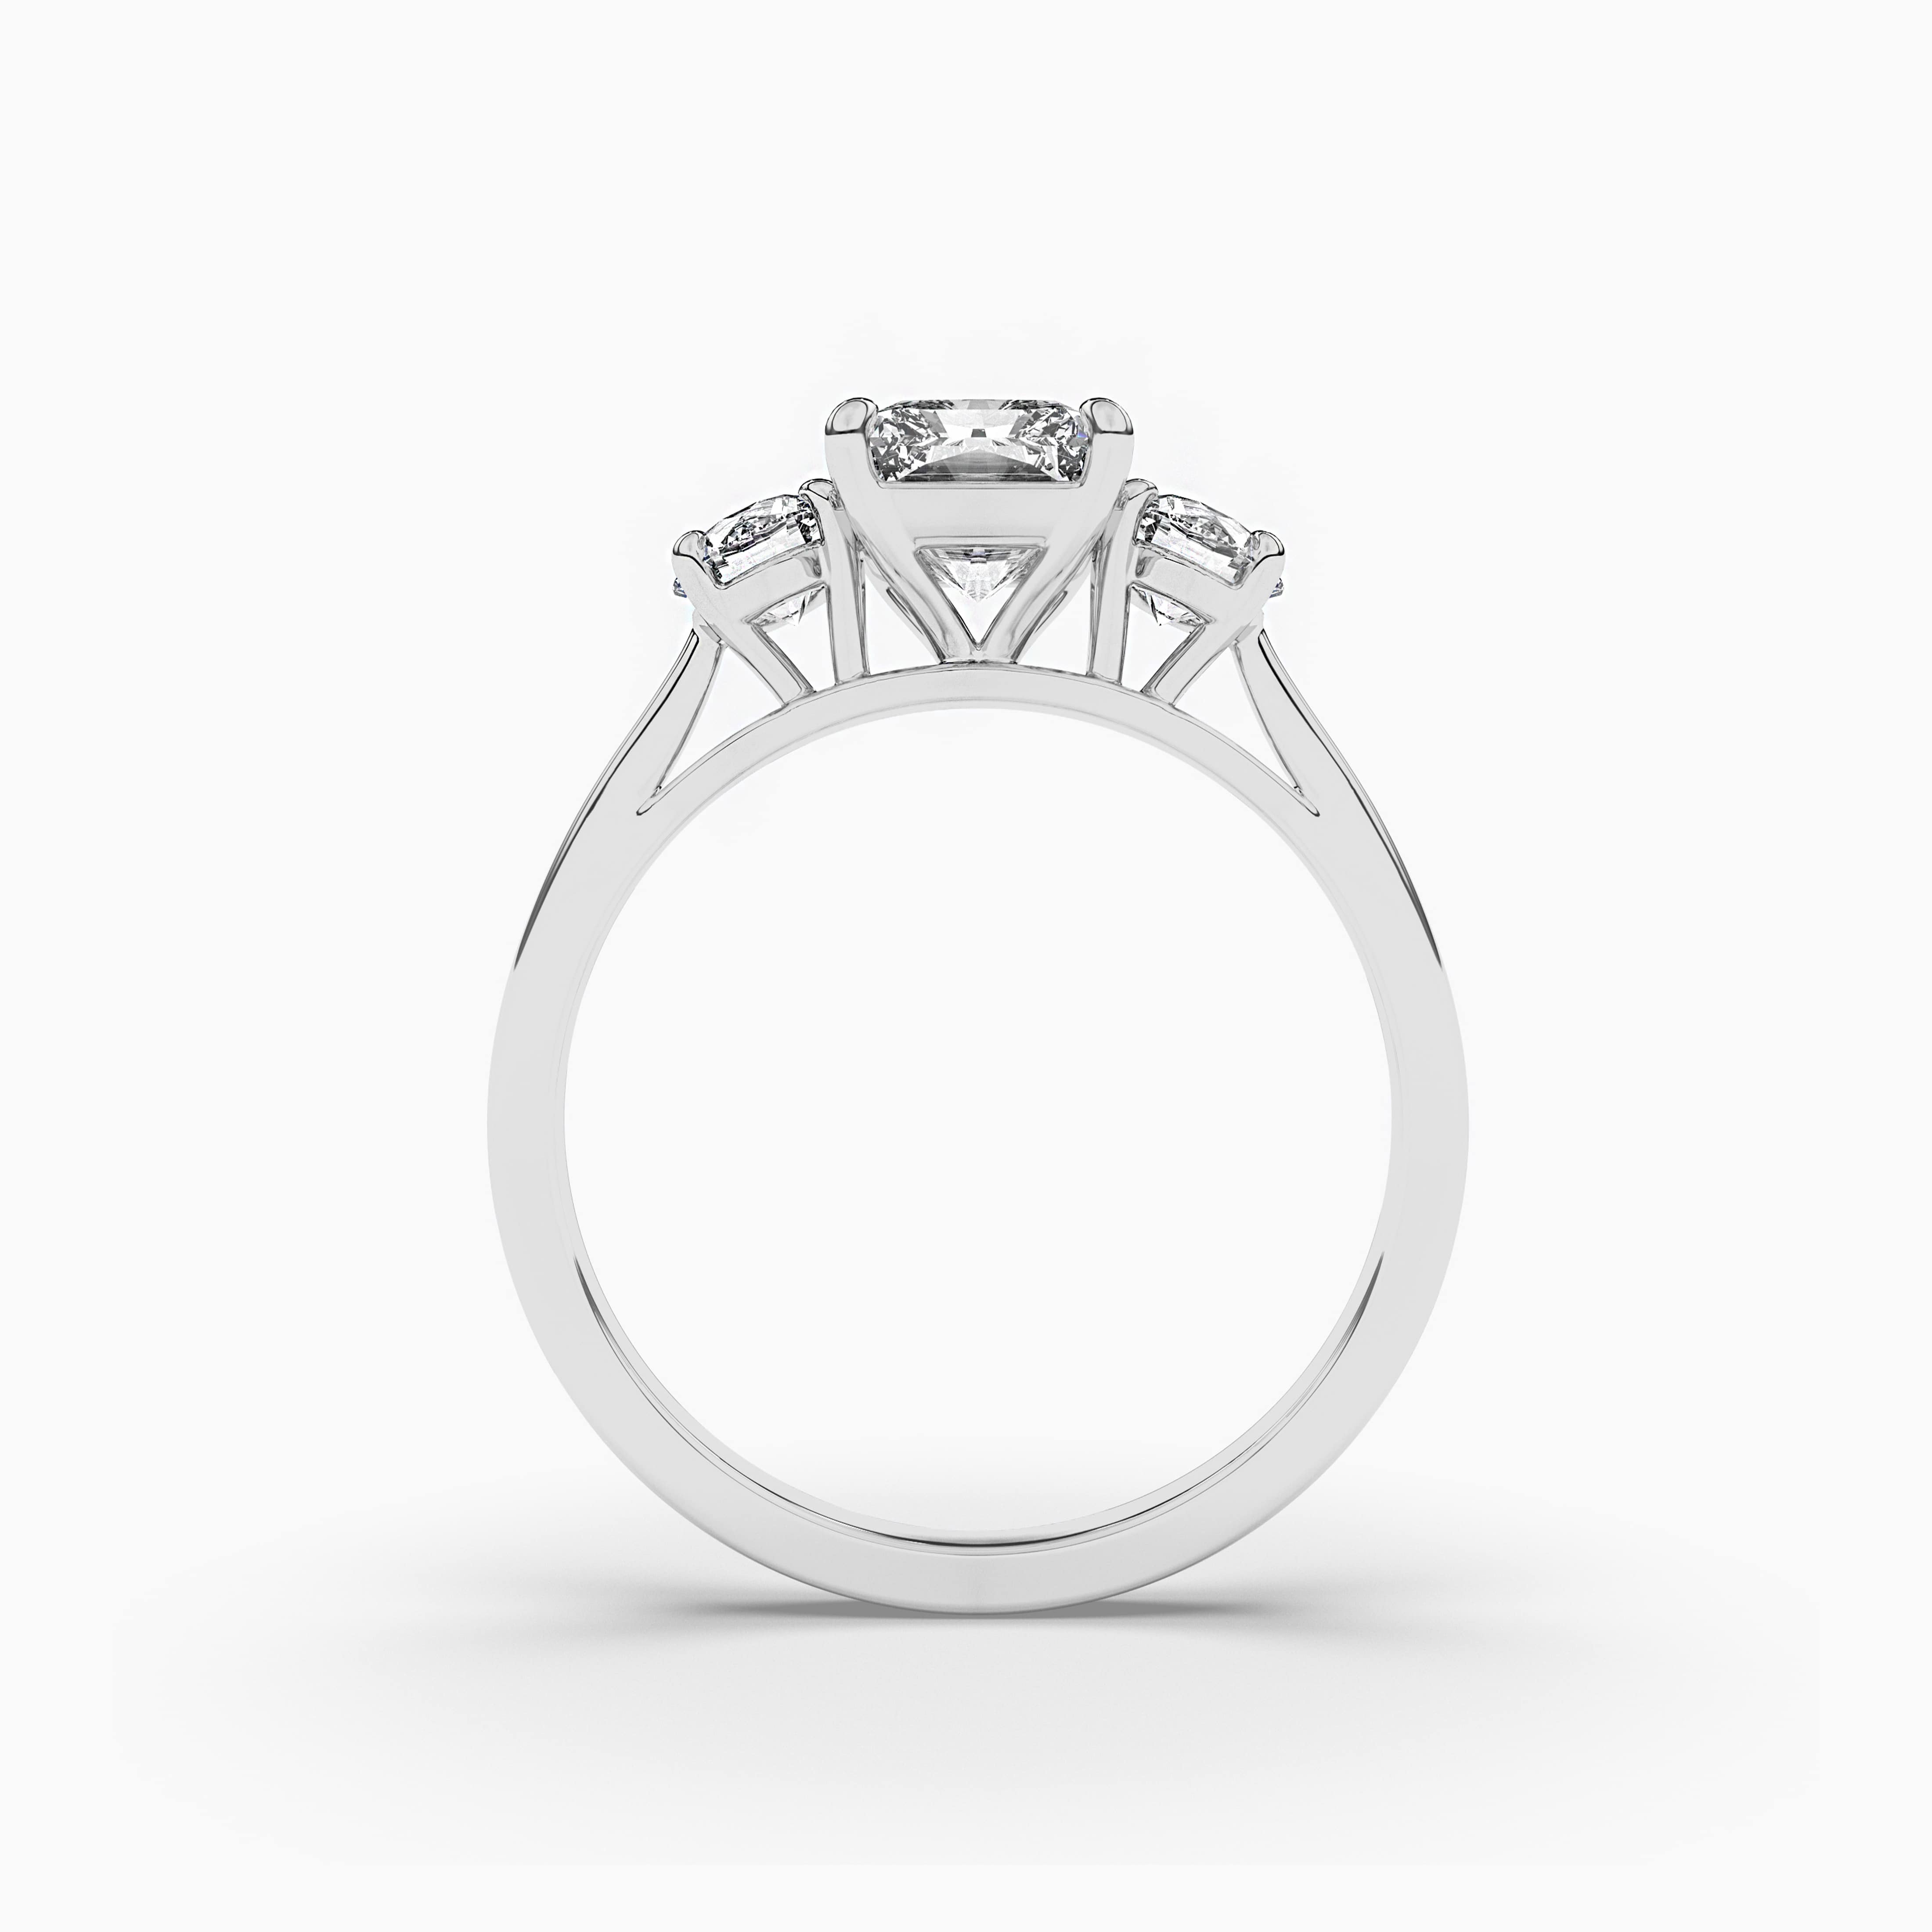  The Three Stone Radiant Engagement Ring White Gold